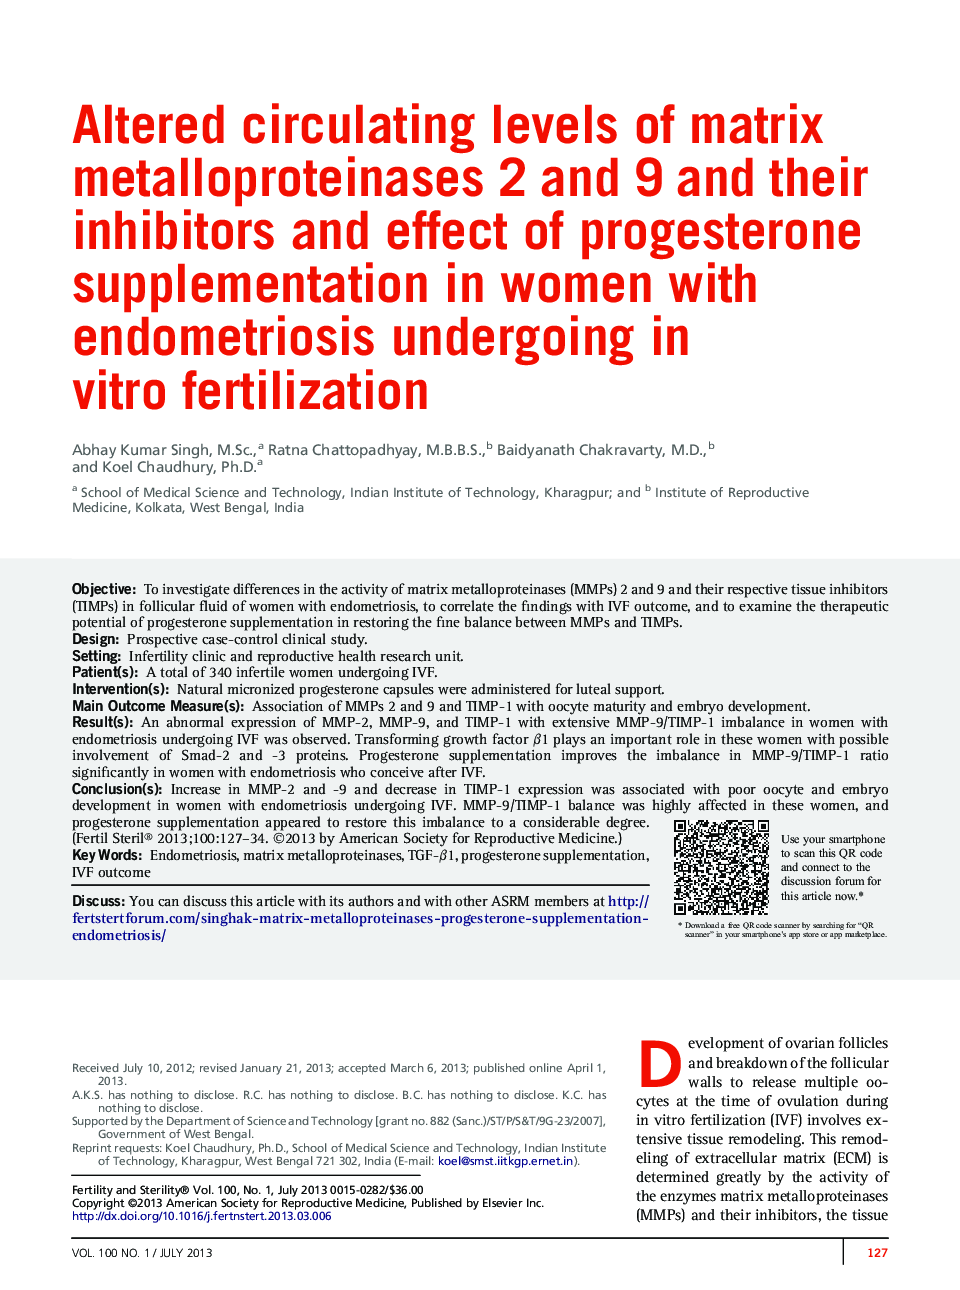 Altered circulating levels of matrix metalloproteinases 2 and 9 and their inhibitors and effect of progesterone supplementation in women with endometriosis undergoing in vitro fertilization